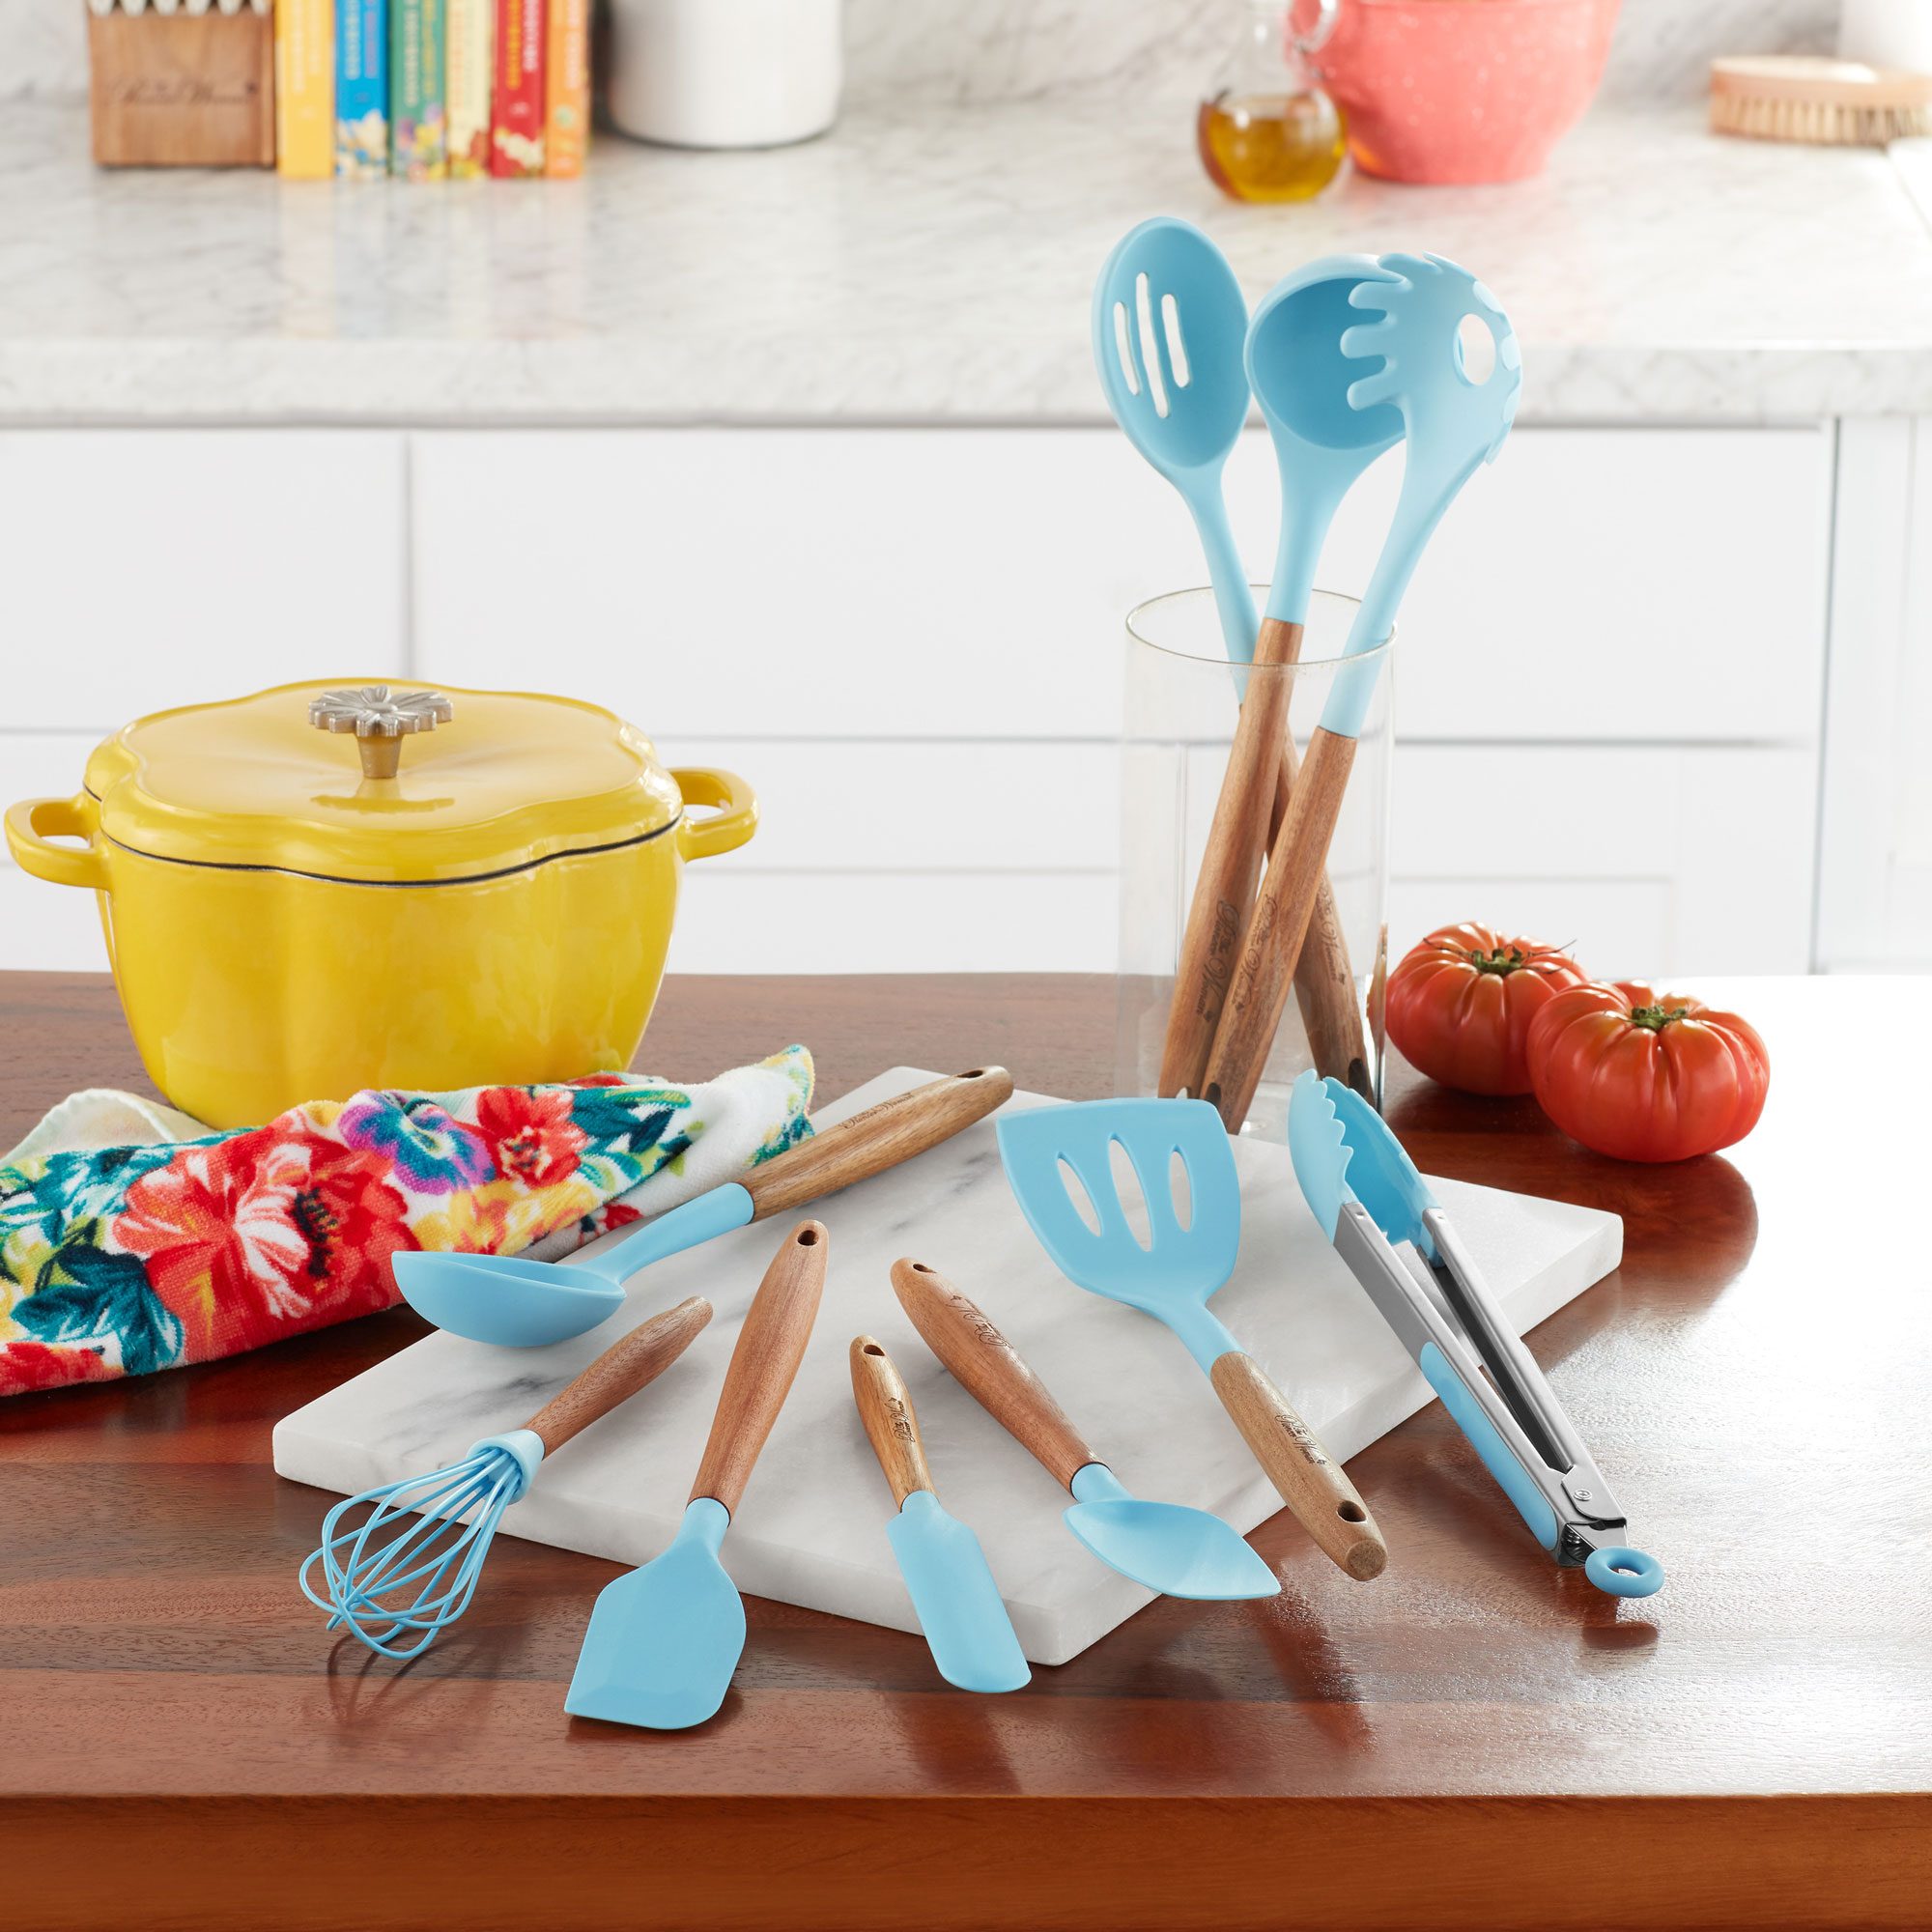 https://www.tasteofhome.com/wp-content/uploads/2022/12/The-Pioneer-Woman-10-Piece-Silicone-and-Acacia-Wood-Handle-Cooking-Utensils-Set-Blue_ecomm_via-walmart.com-FT.jpg